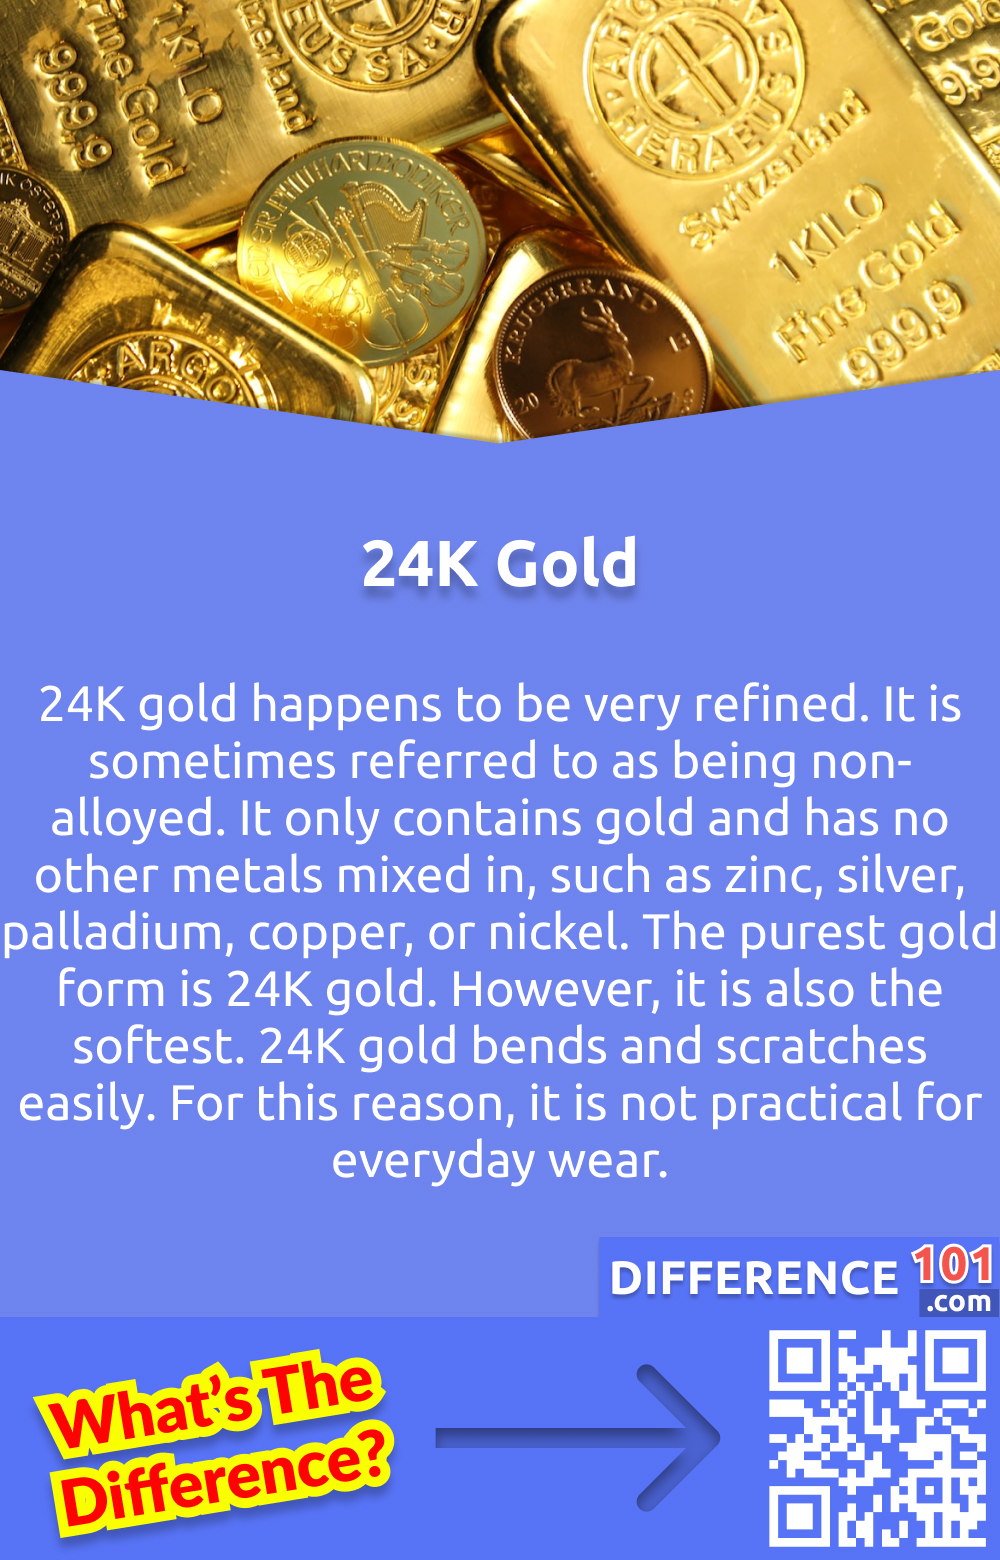 24K Gold: What Is It? 24K gold happens to be very refined. It is sometimes referred to as being non-alloyed. It only contains gold and has no other metals mixed in, such as zinc, silver, palladium, copper, or nickel. The purest gold form is 24K gold. However, it is also the softest. 24K gold bends and scratches easily. For this reason, it is not practical for everyday wear.